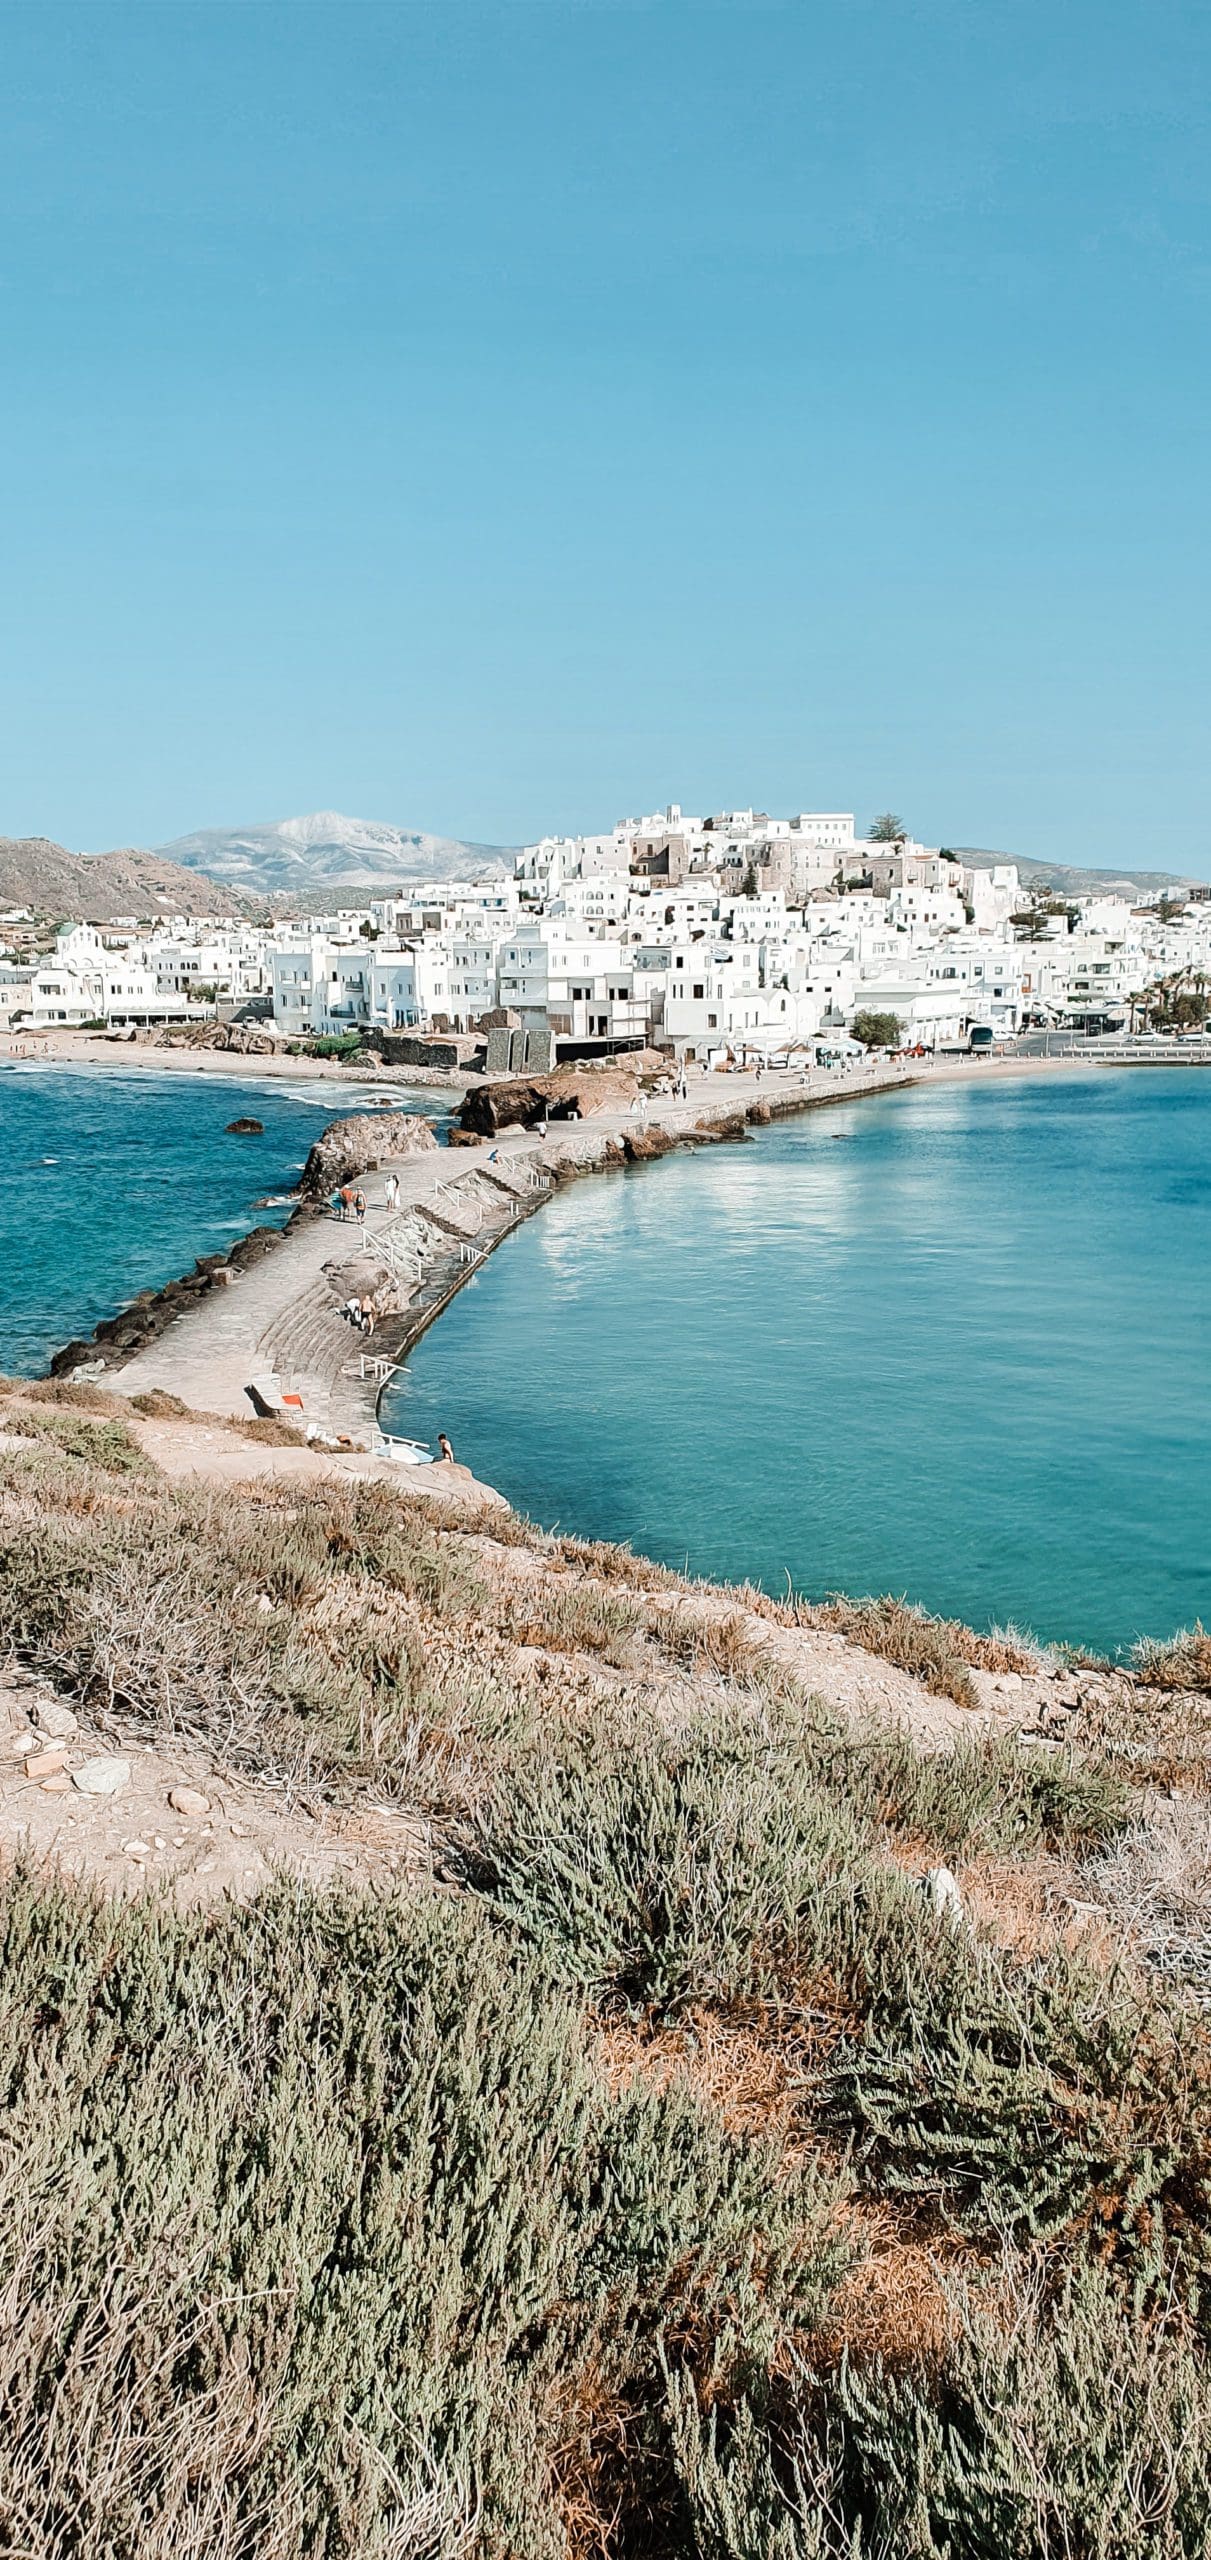 View of Naxos from The Portara